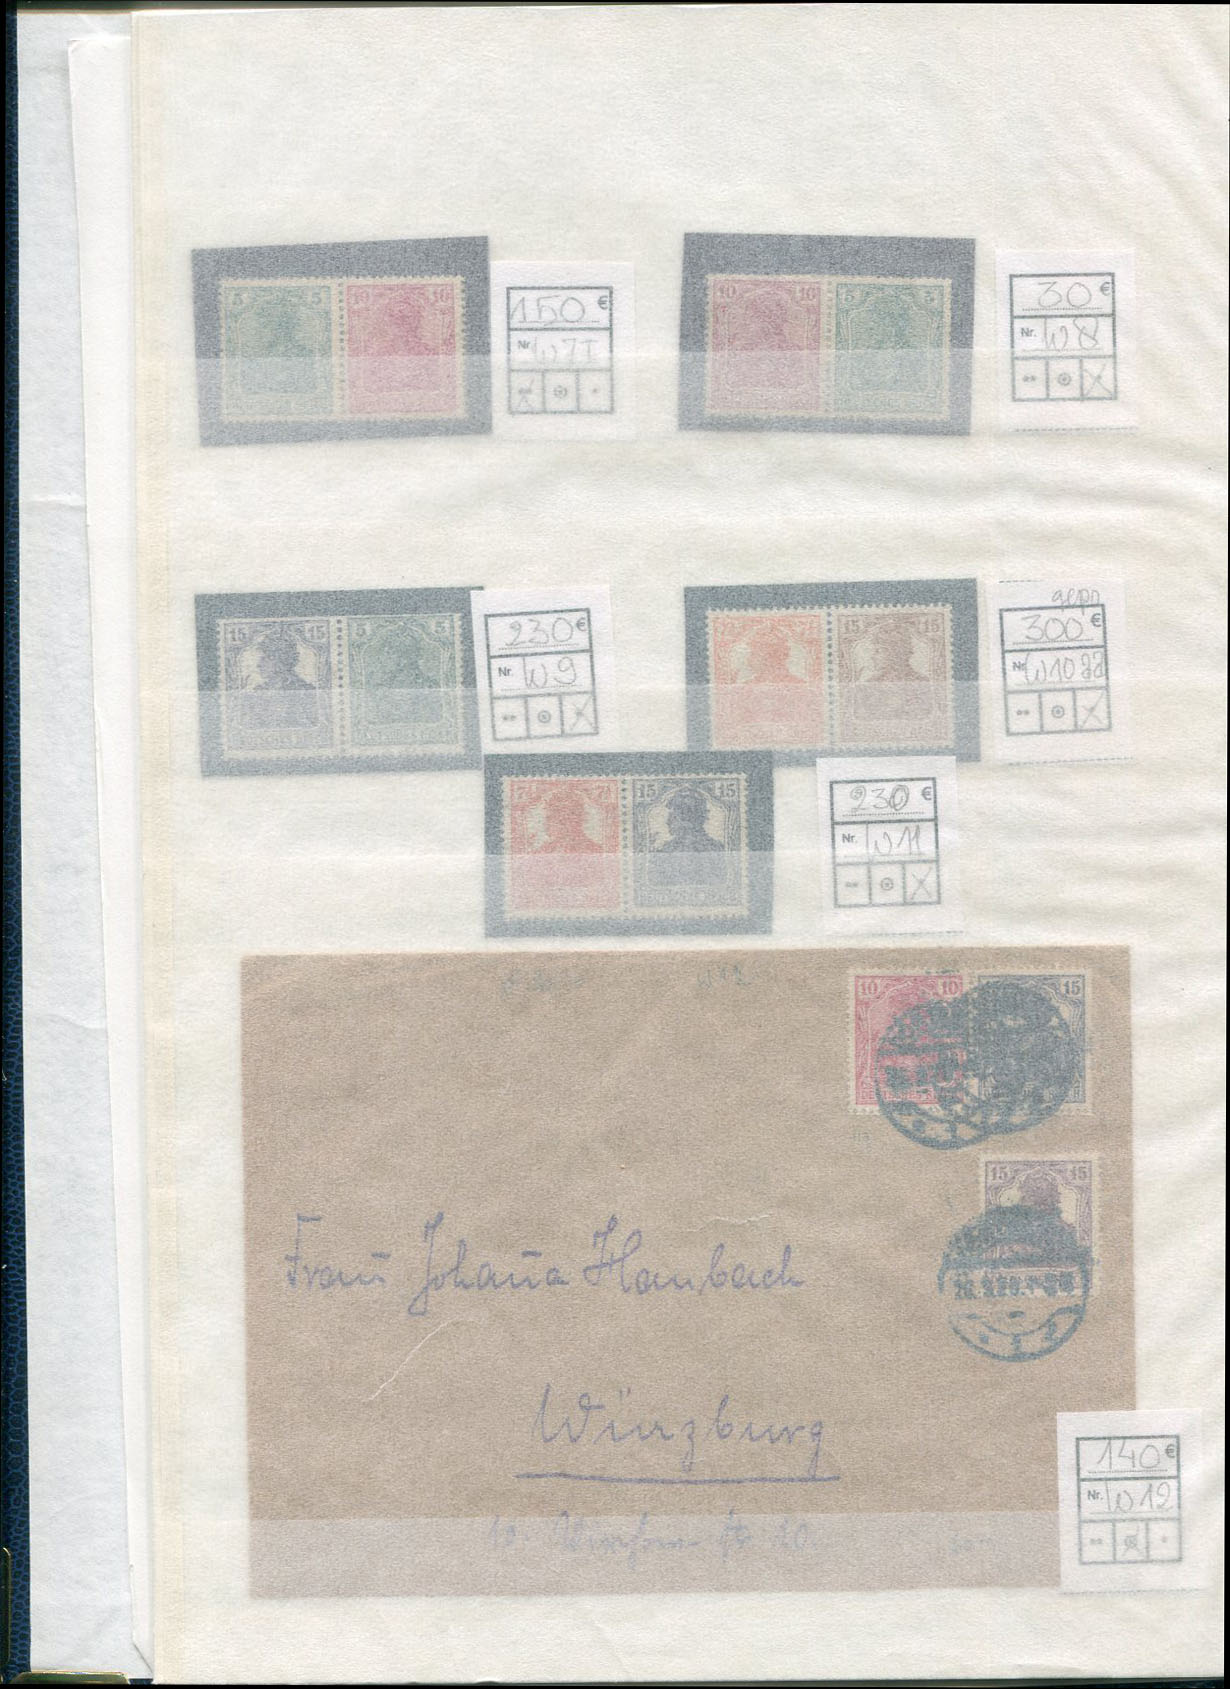 Lot 1450 - LARGE LOTS AND COLLECTIONS LIECHTENSTEIN  -  Cherrystone Auctions U.S. & Worldwide Stamps & Postal History